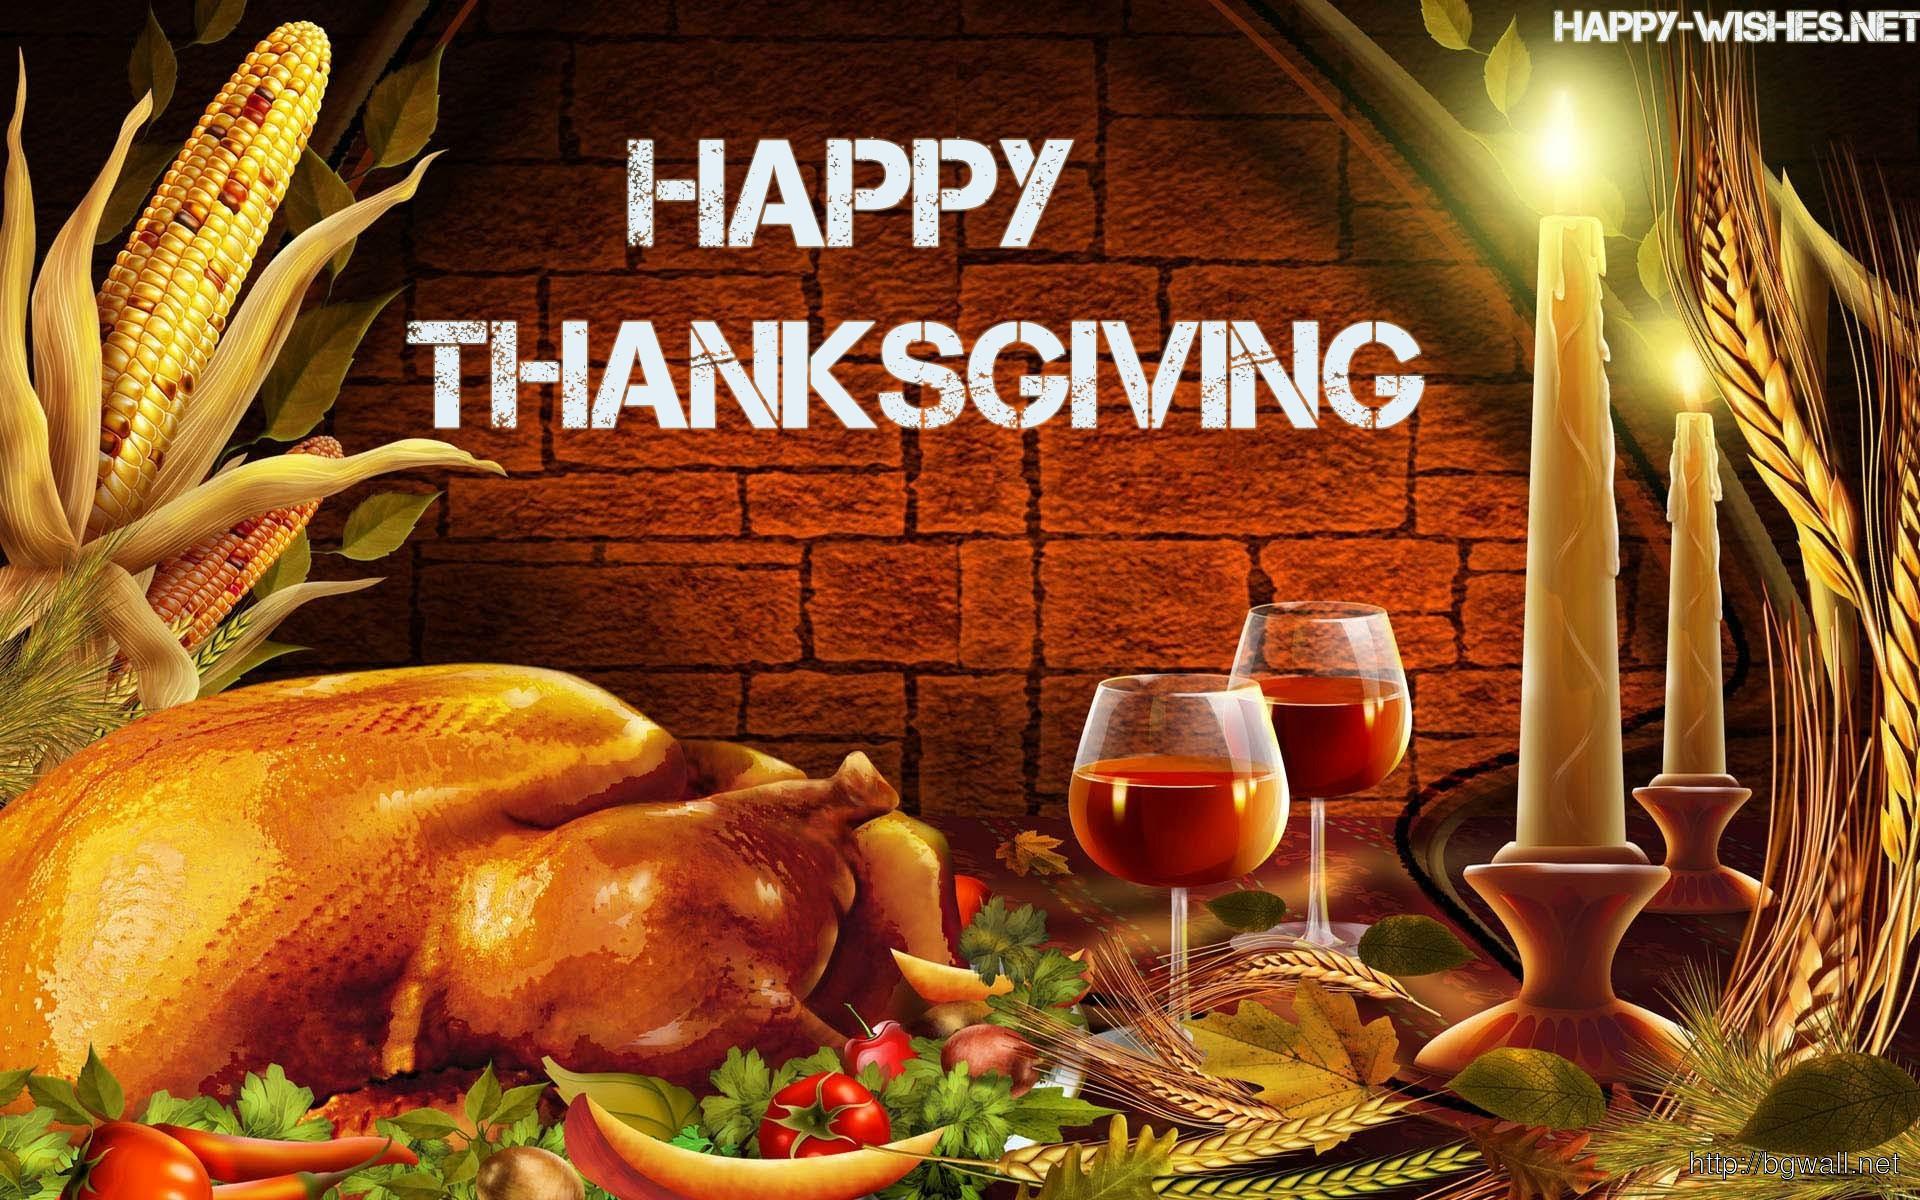 Happy Thanksgiving 2019 Picture, Image